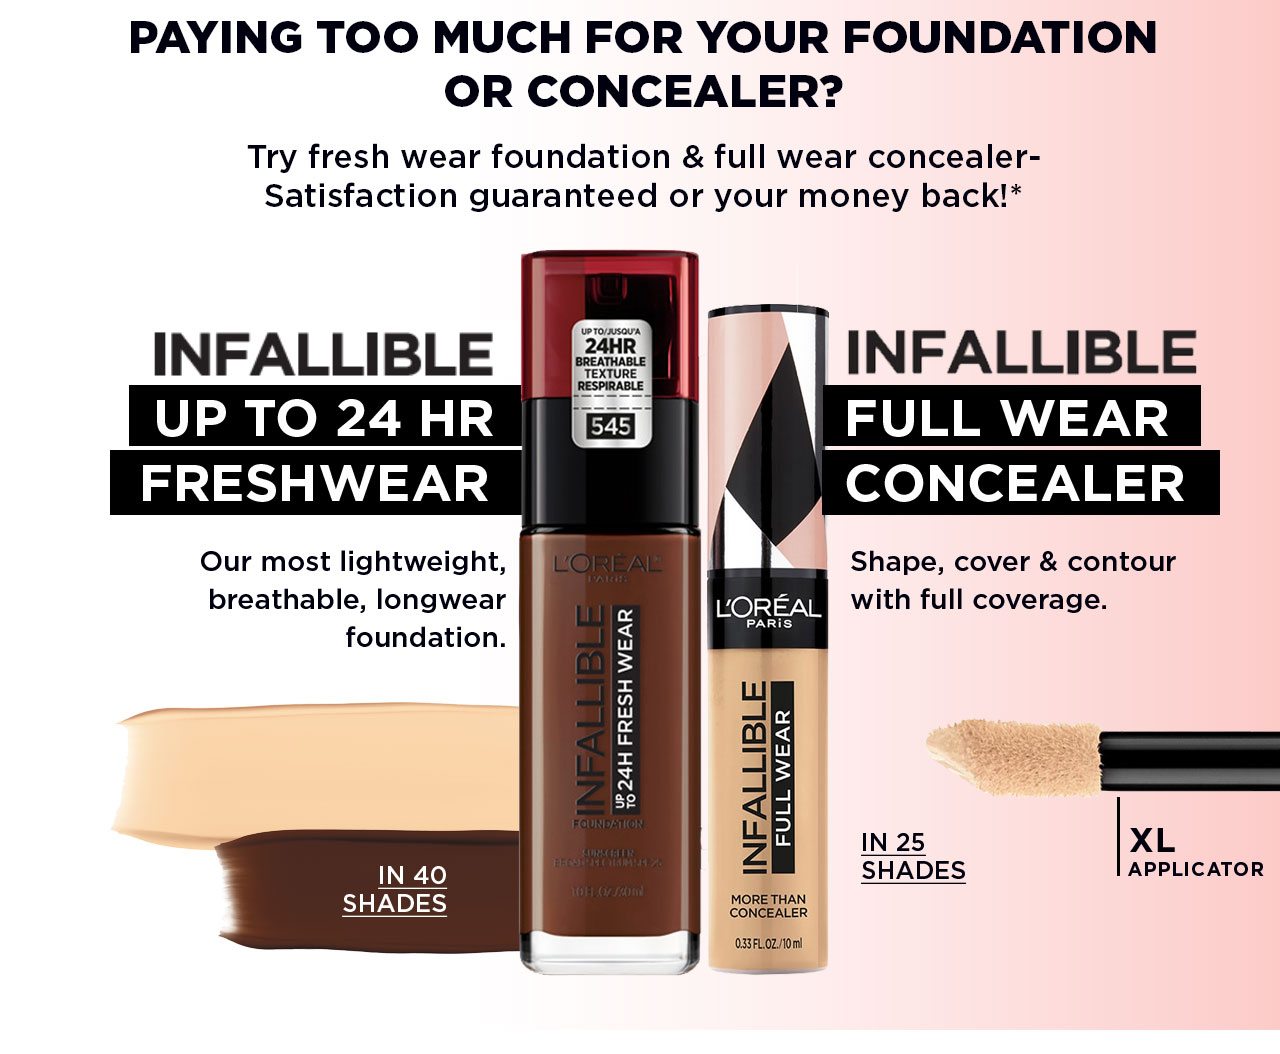 PAYING TOO MUCH FOR YOUR FOUNDATION OR CONCEALER? - Try fresh wear foundation and full wear concealer- Satisfaction guaranteed or your money back!* - INFALLIBLE - UP TO 24 HR FRESHWEAR - Our most lightweight, breathable, longwear foundation. - IN 40 SHADES - INFALLIBLE - FULL WEAR CONCEALER - Shape, cover and contour with full coverage. - IN 25 SHADES - XL APPLICATOR